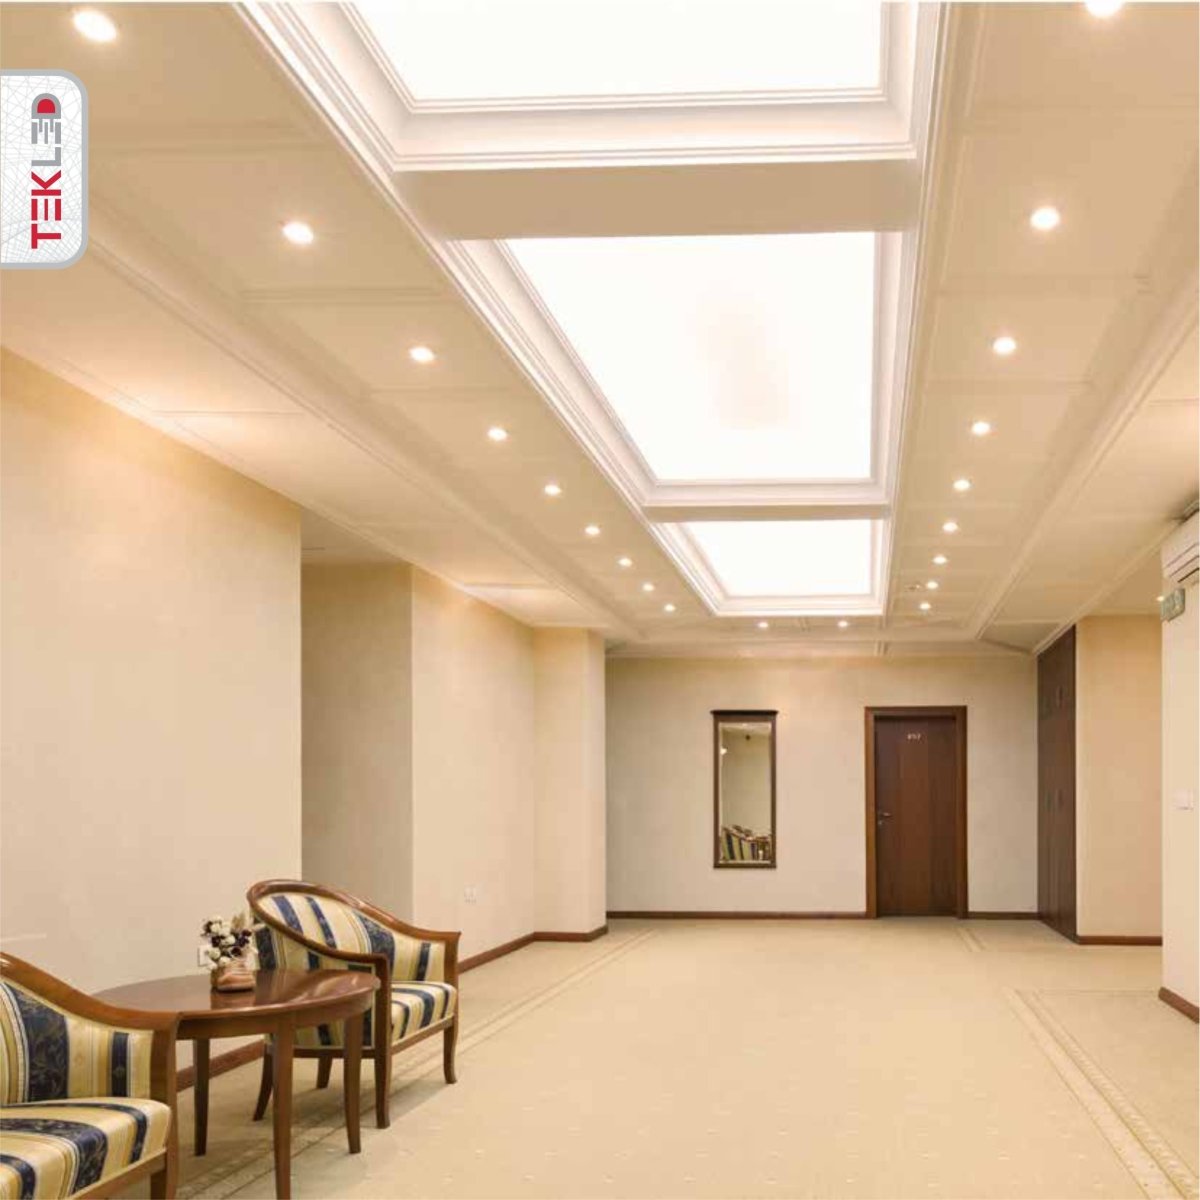 Downlight Led Round Slim Panel Light 12W 3000K Warm White D170Mm in indoor setting waiting room